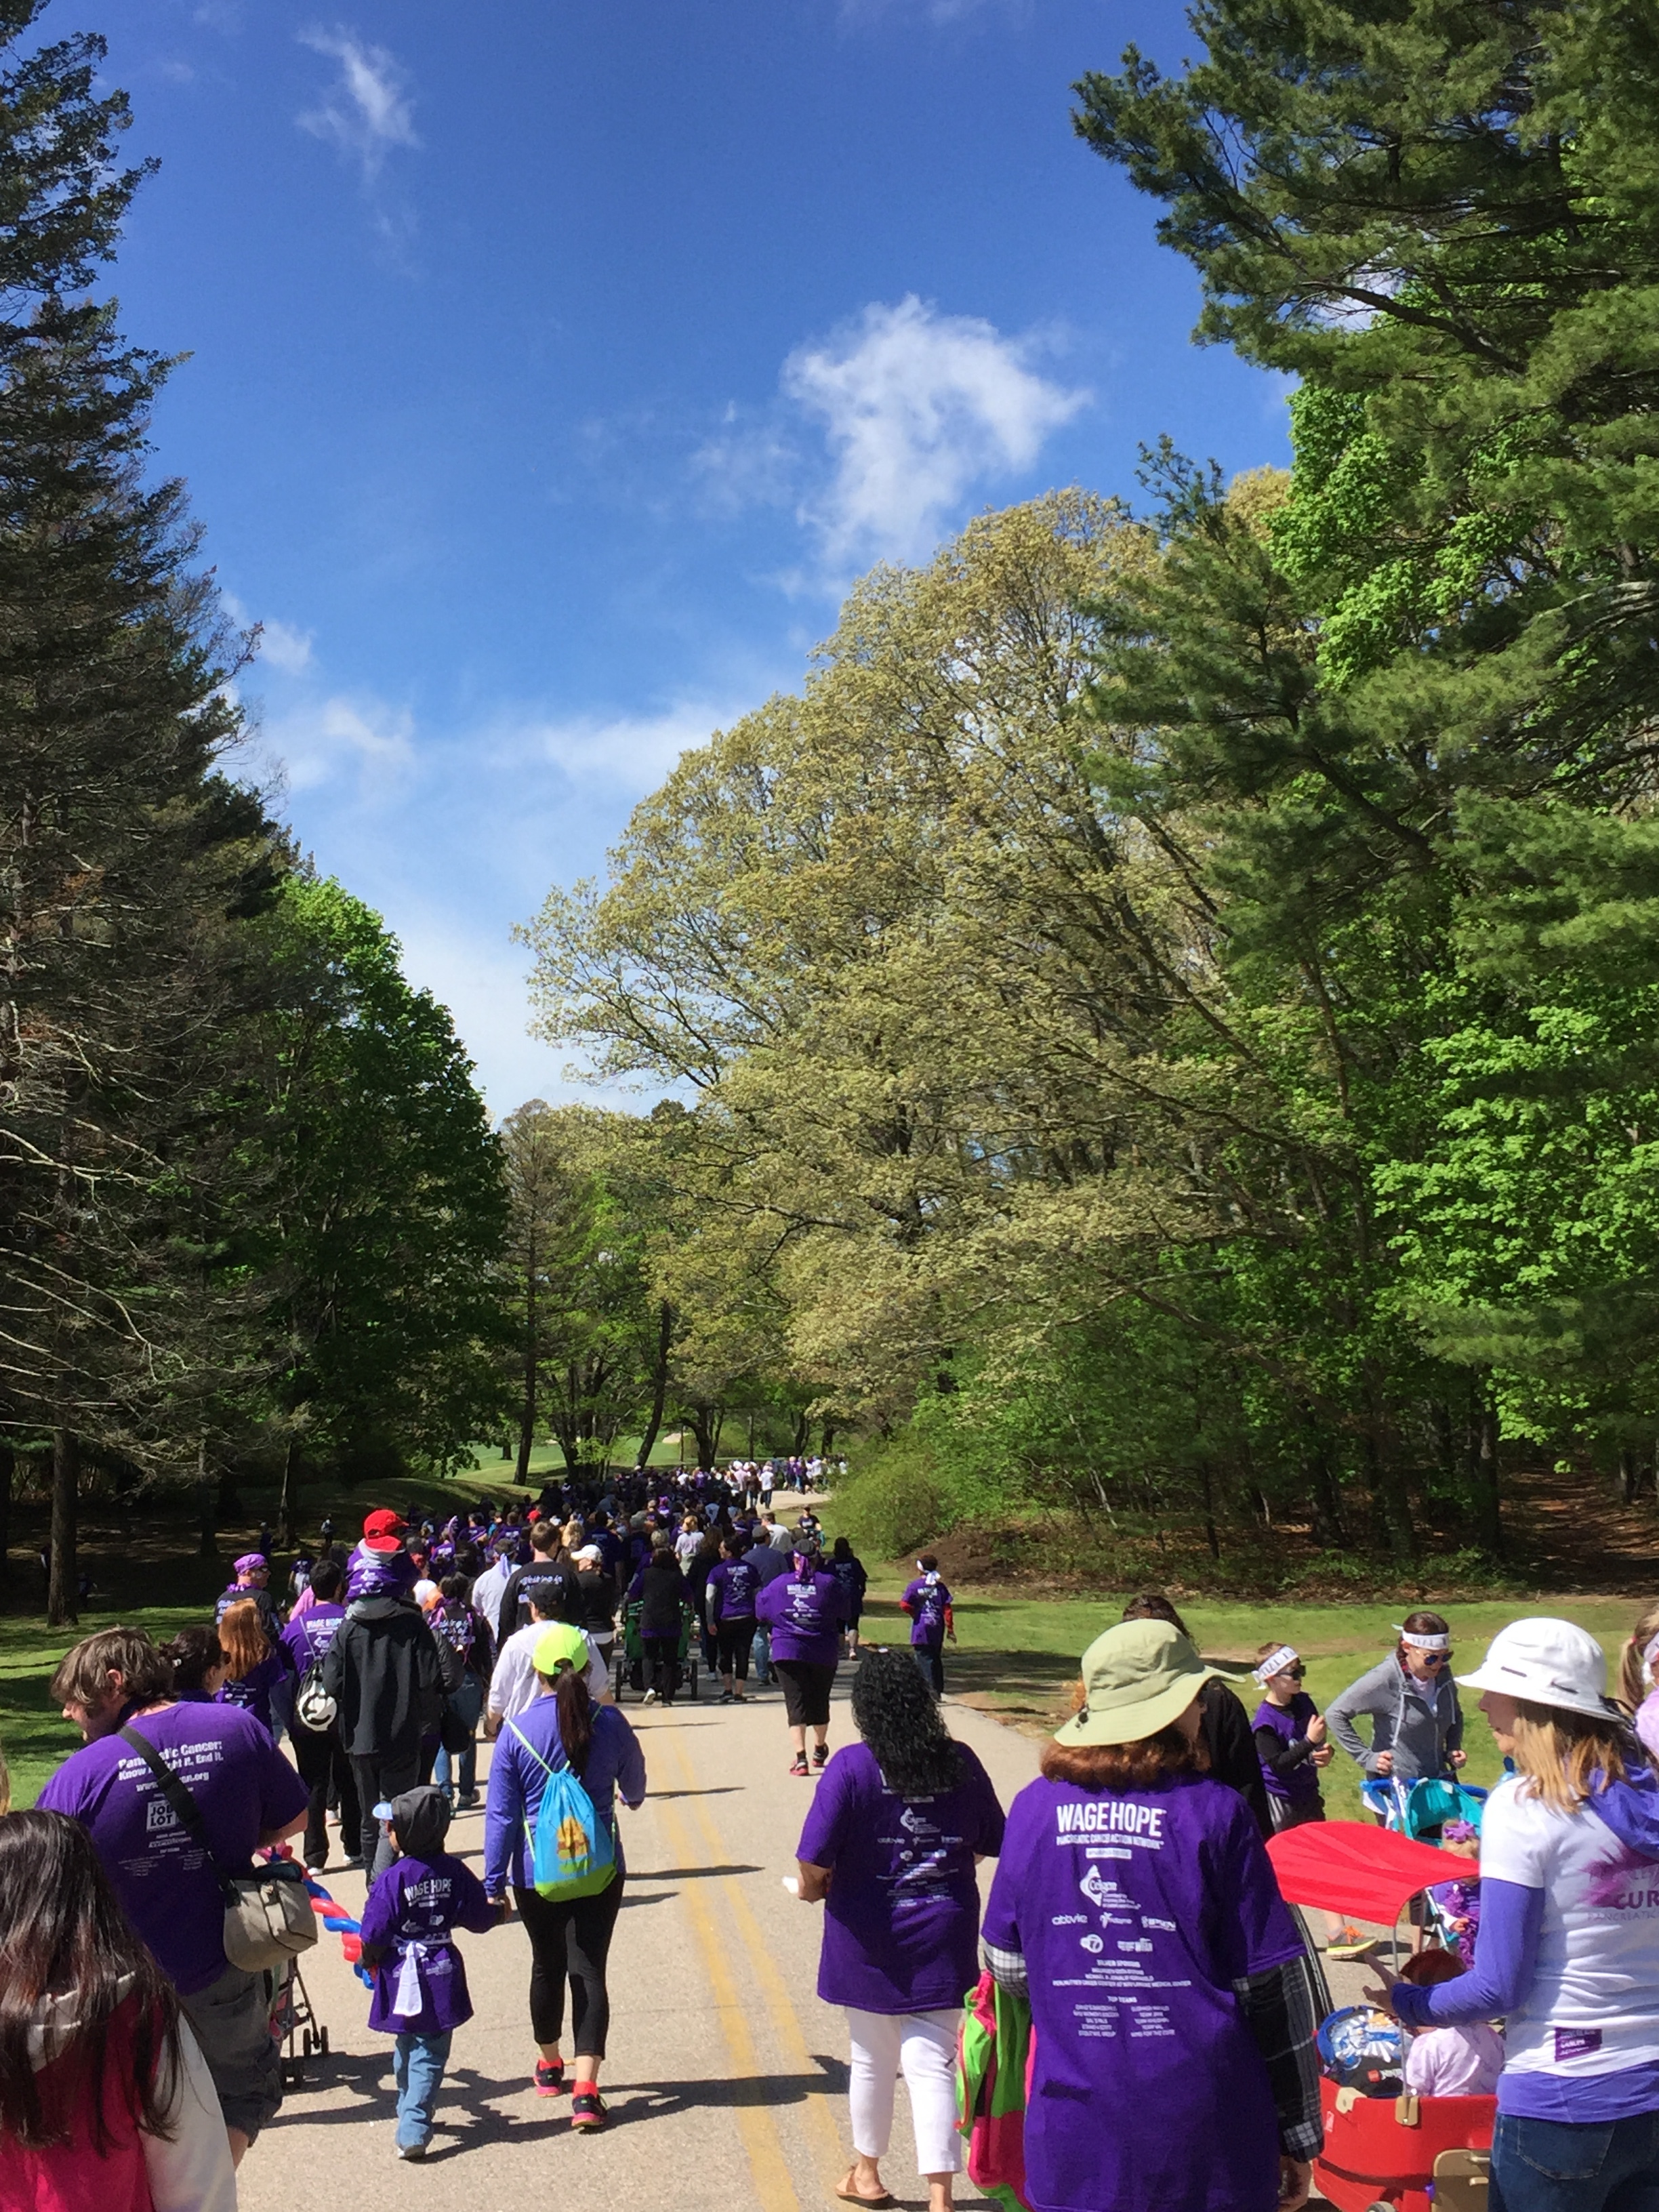  PurpleStride 2018 - The Walk to End Pancreatic Cancer 